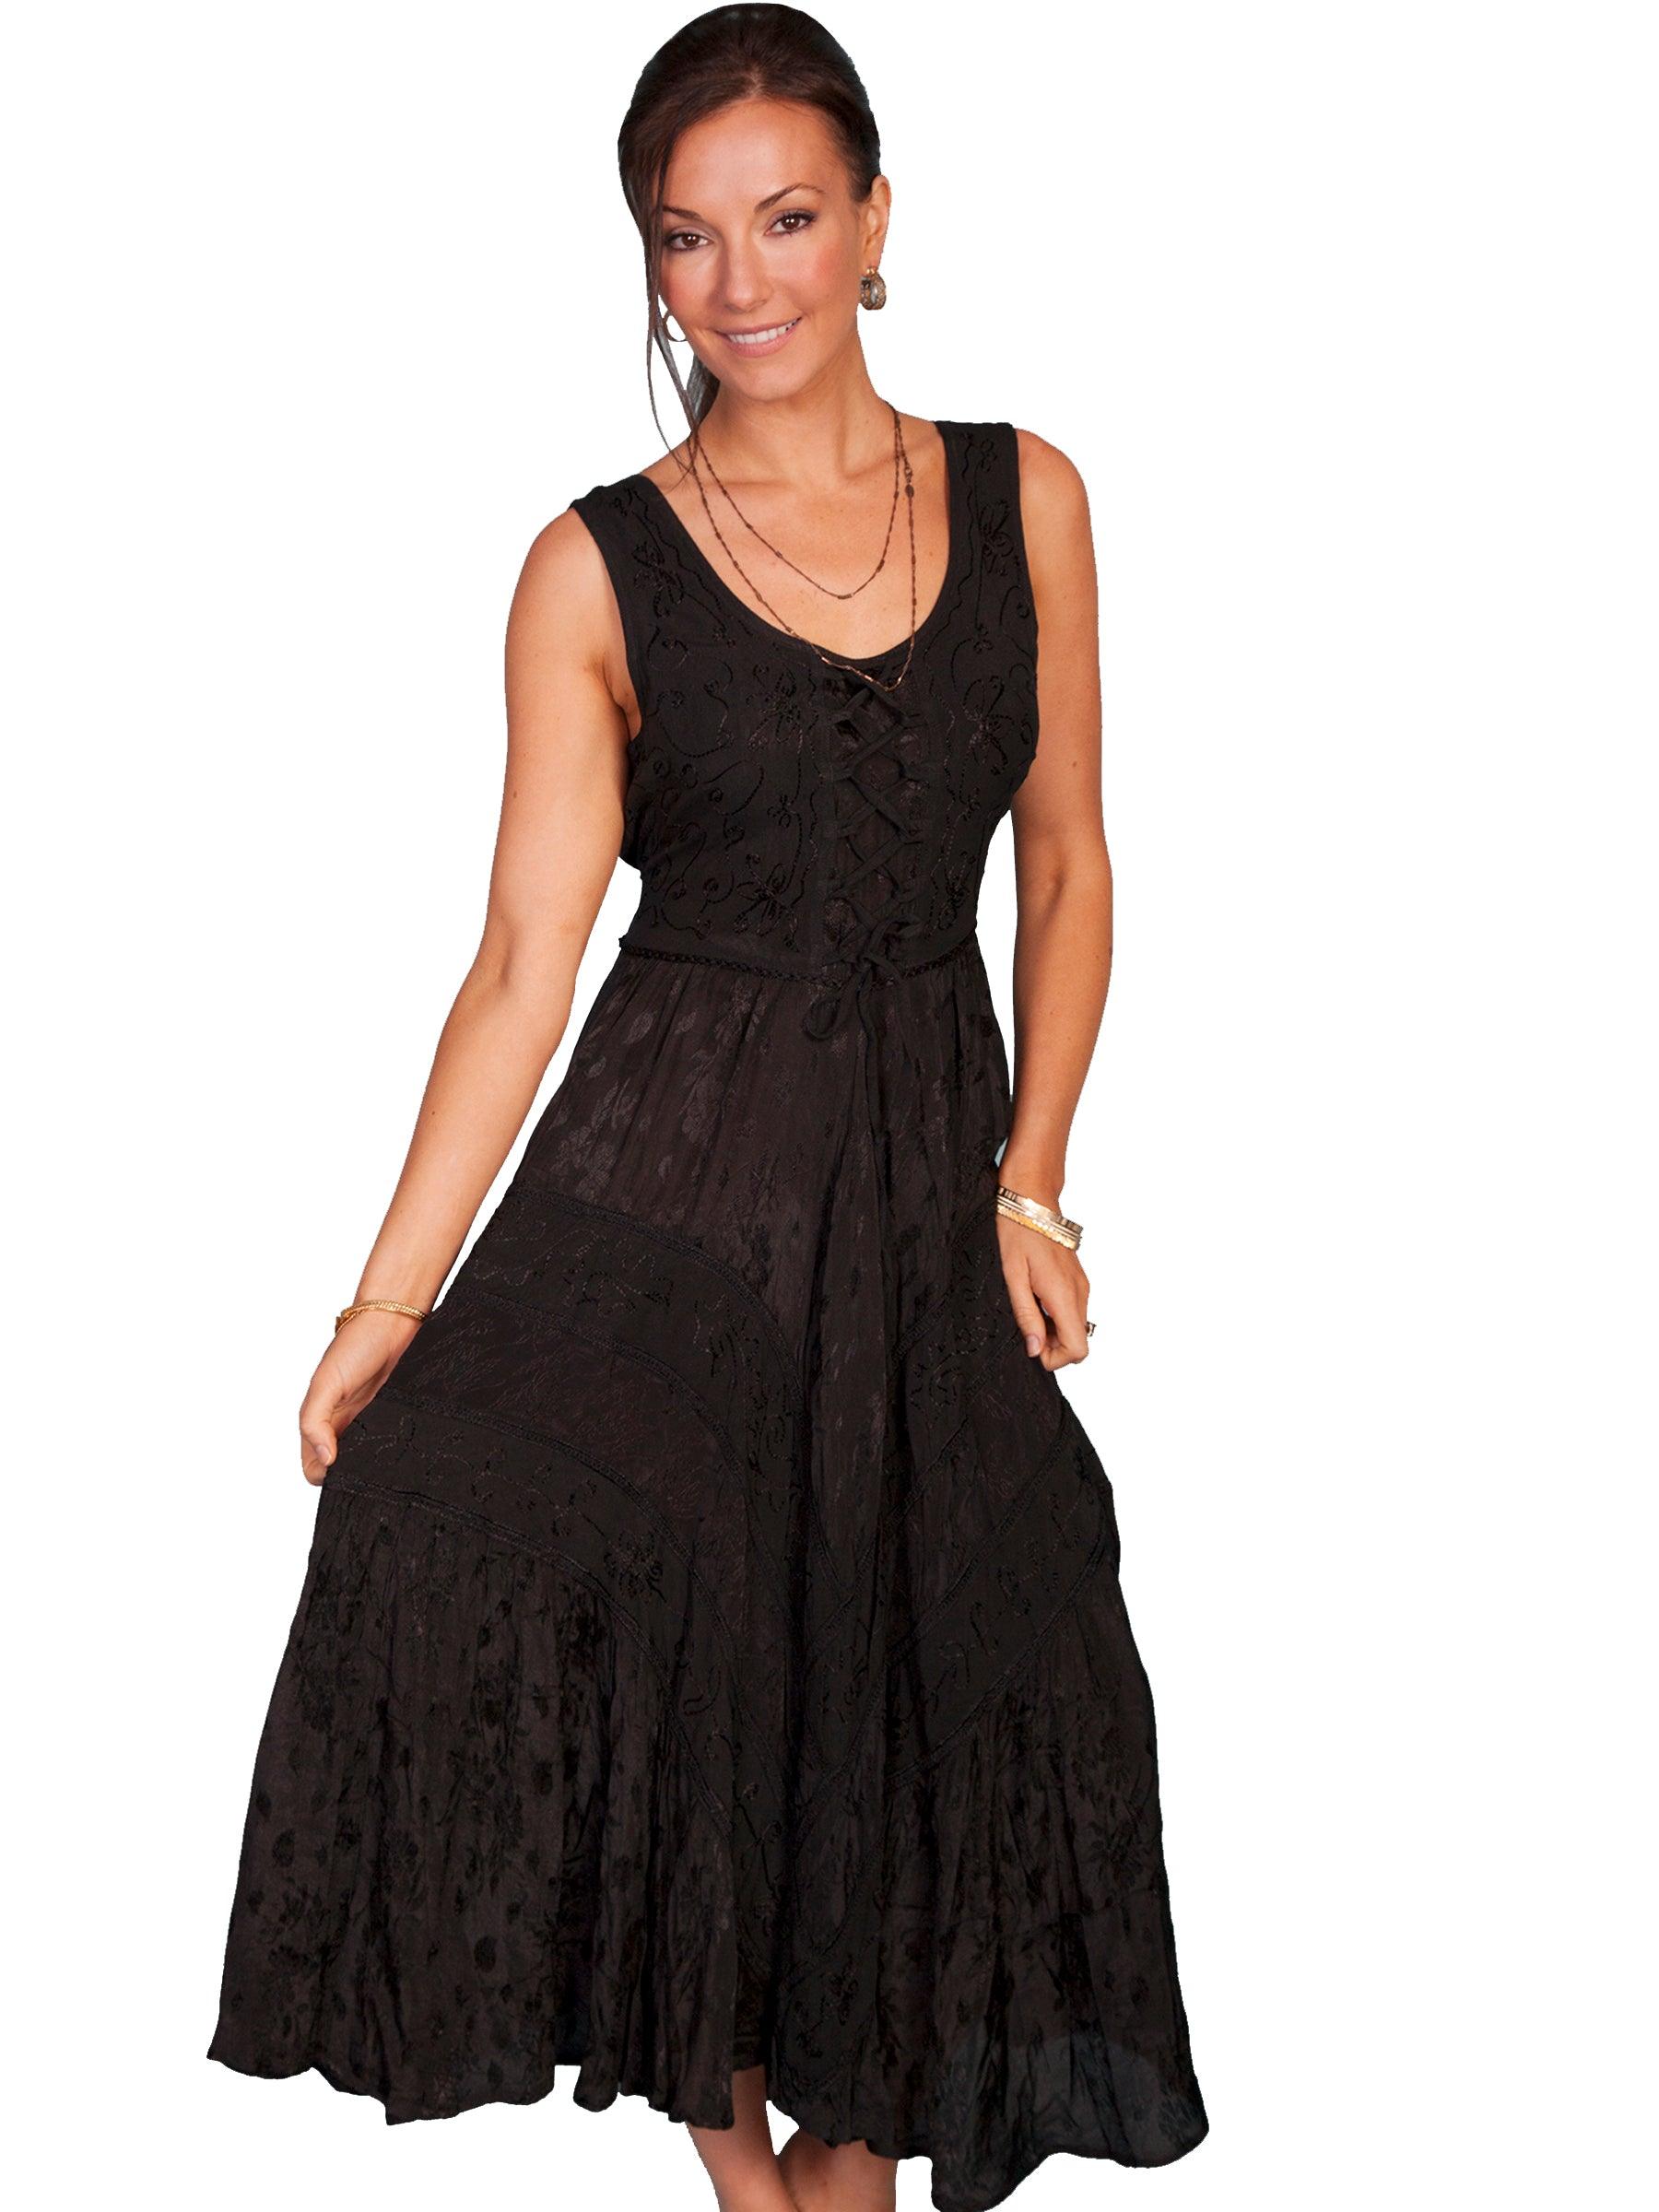 Scully BLACK LACE FRONT DRESS - Flyclothing LLC